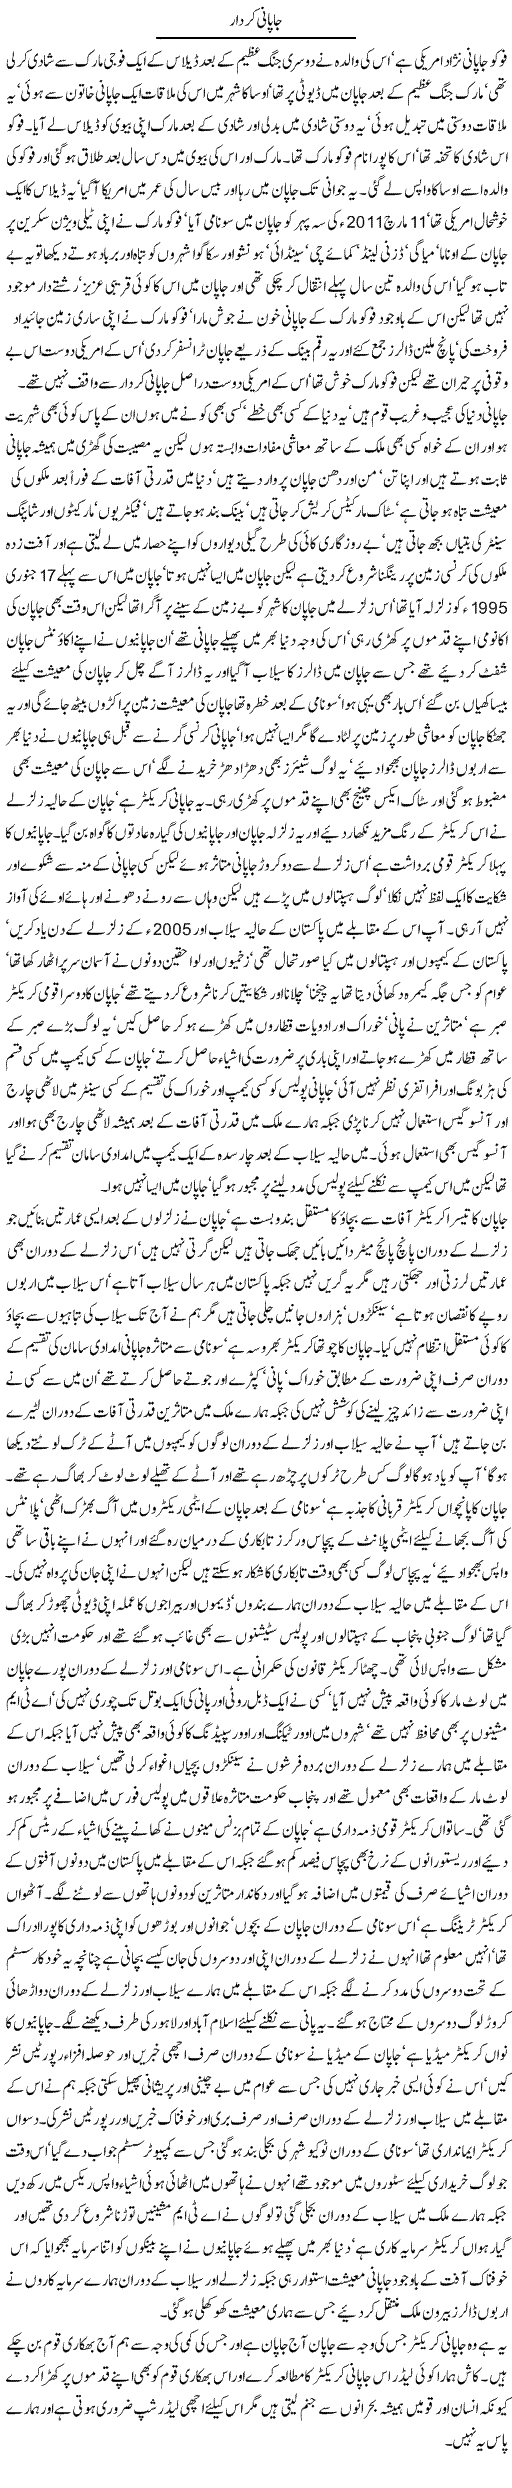 Japan Disaster Express Column Javed Chaudhry 29  March 2011